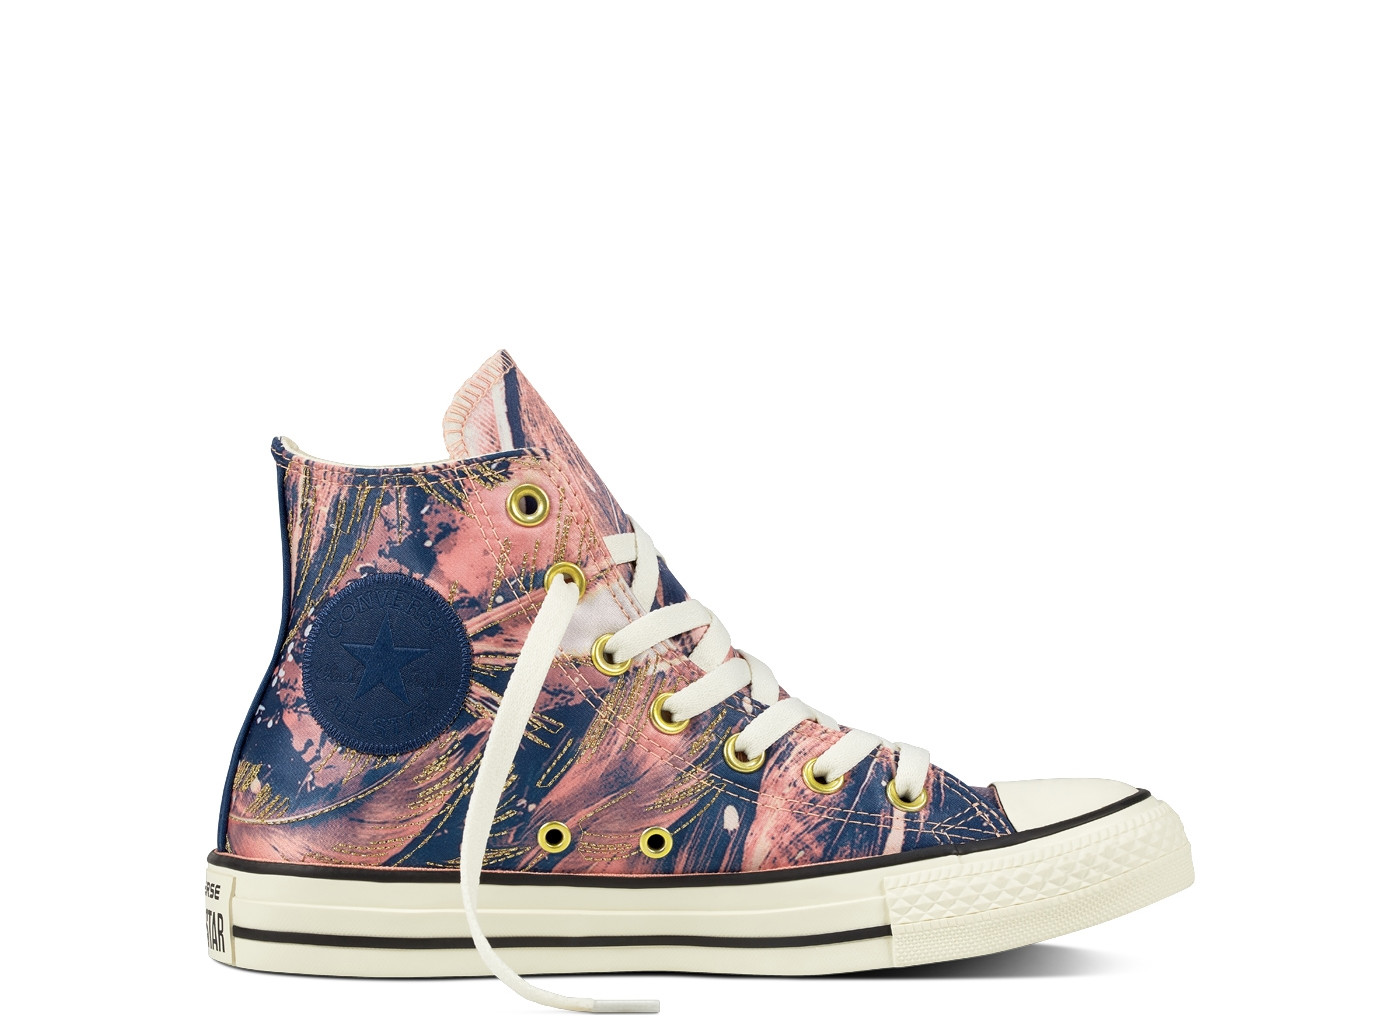 converse chuck taylor all star rose pale